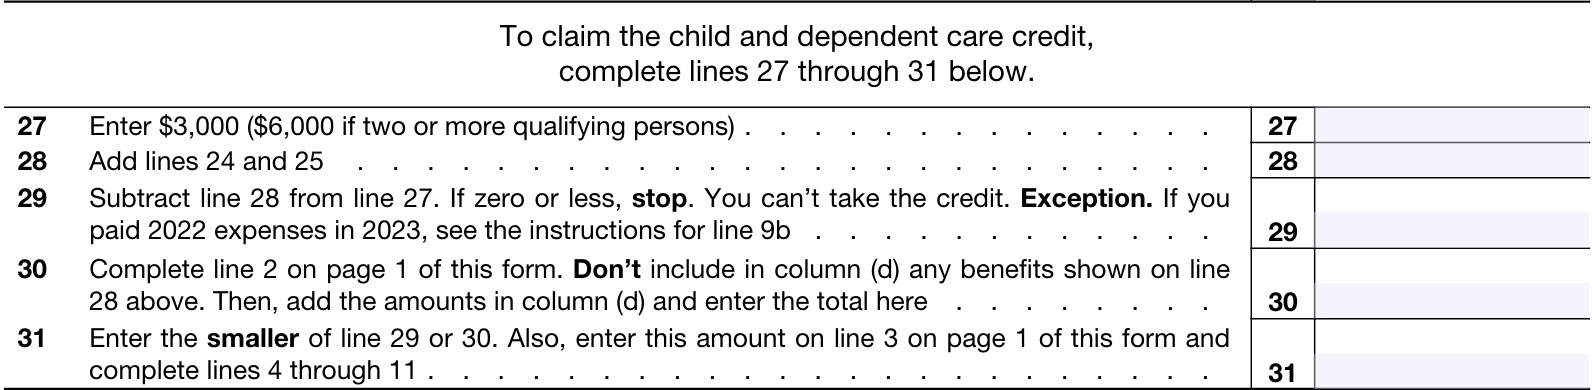 IRS Form 2441, lines 27-31 only need to be completed by taxpayers who report child and dependent care benefits and are taking the child and dependent care tax credit